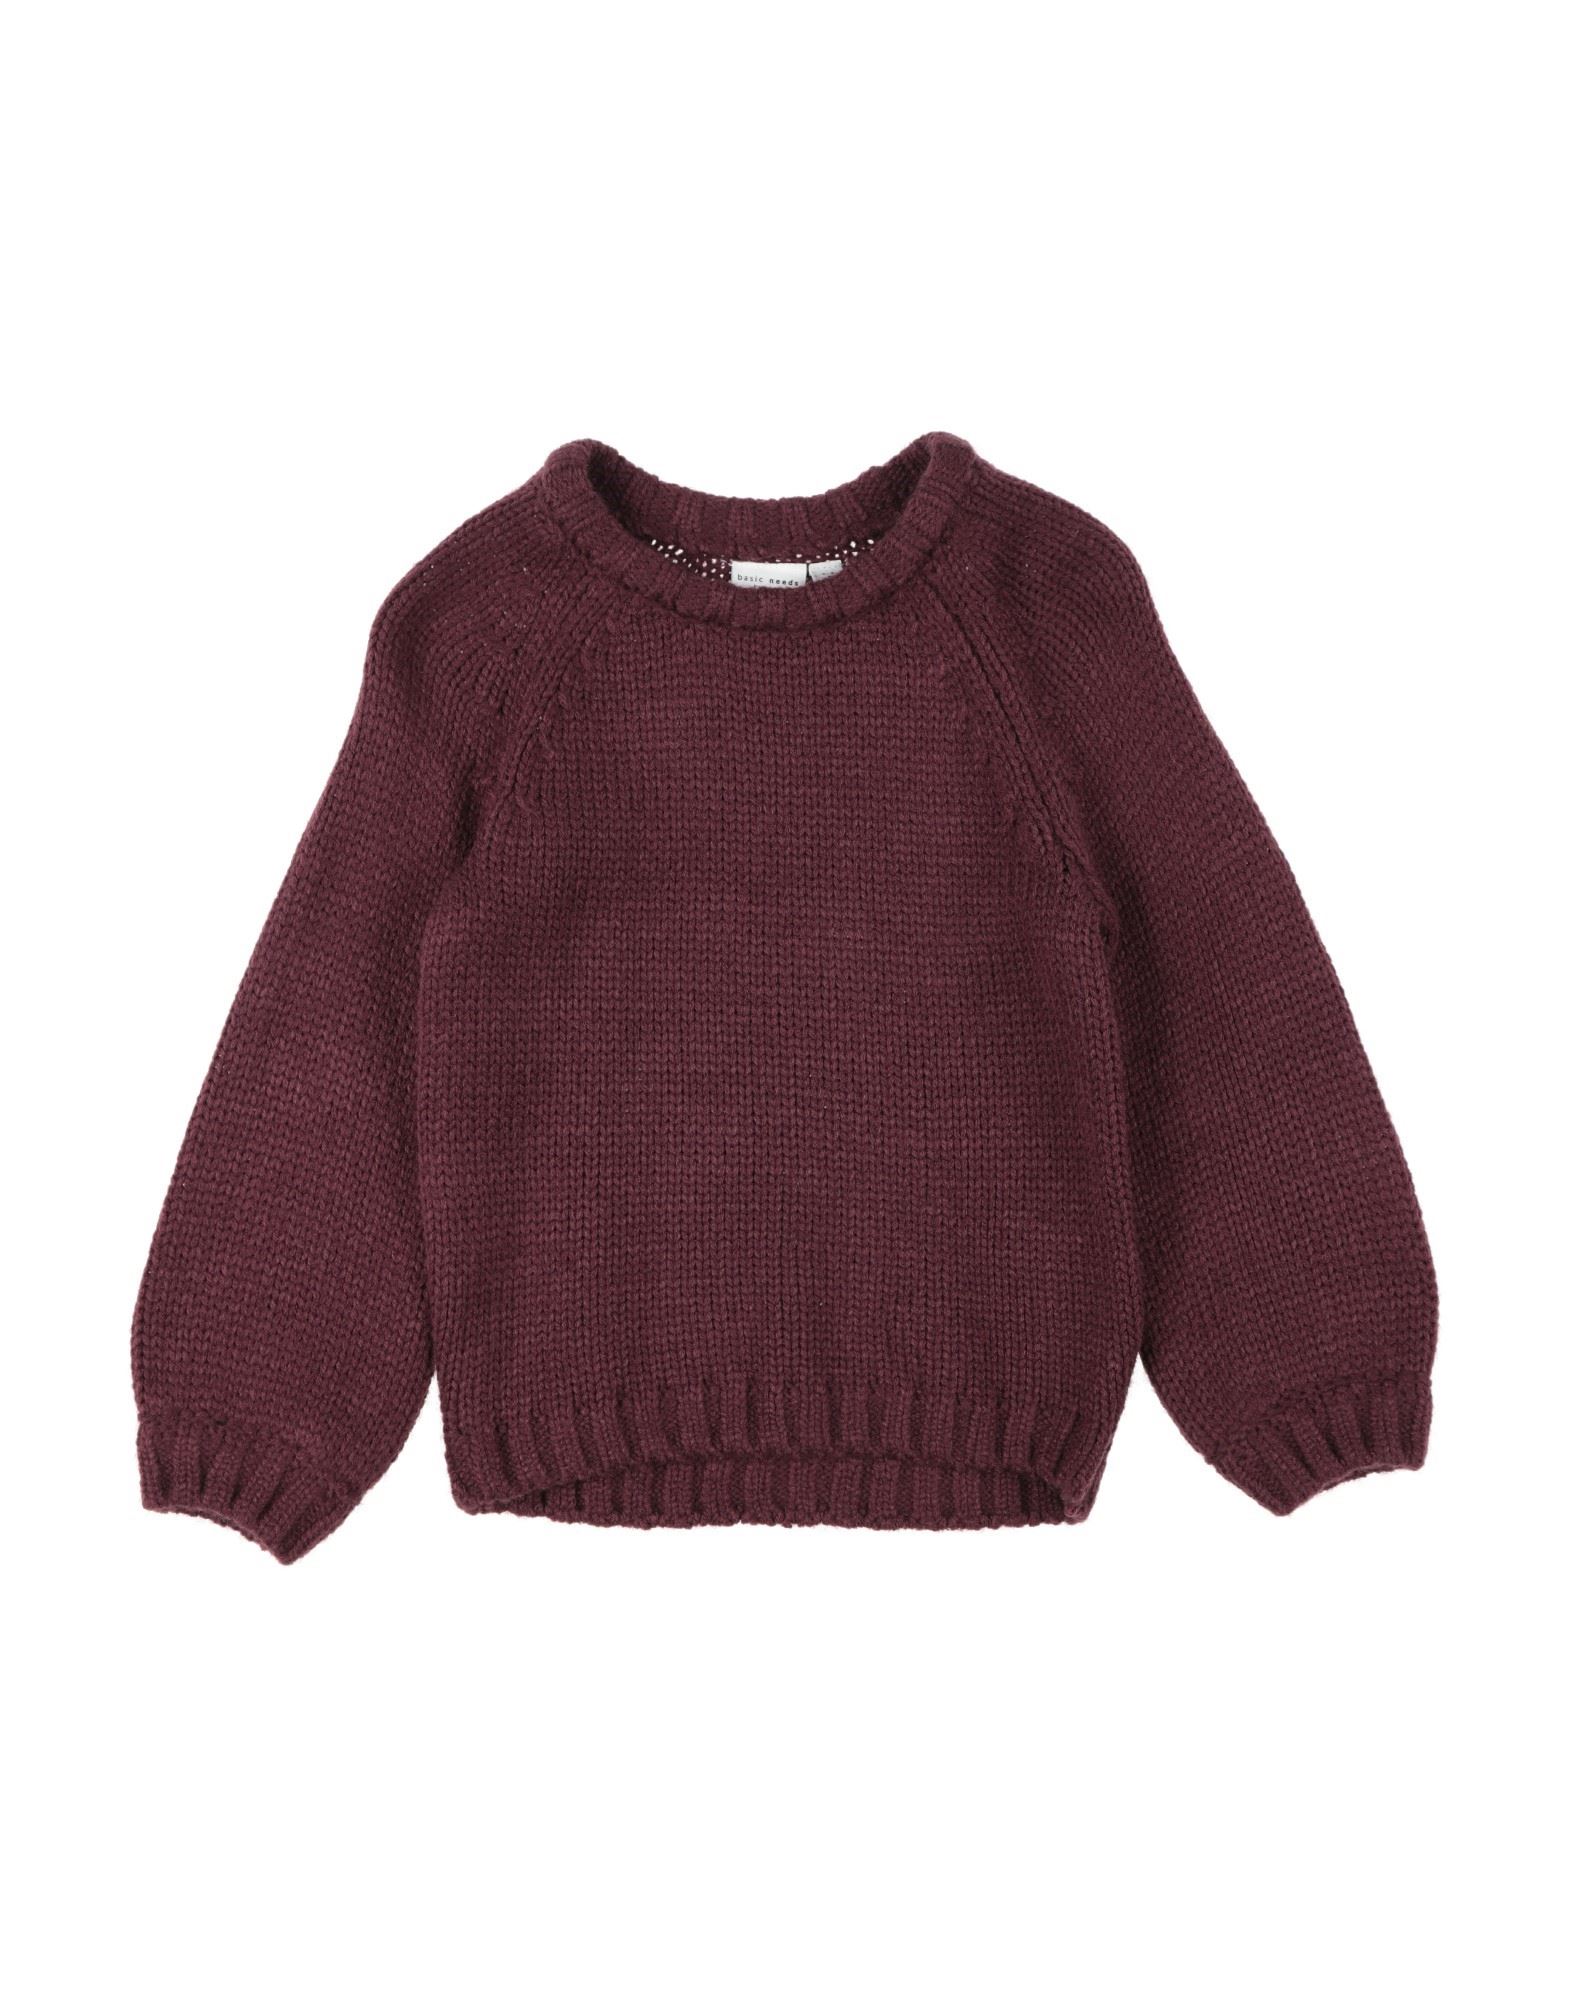 NAME IT® Pullover Kinder Pflaume von NAME IT®